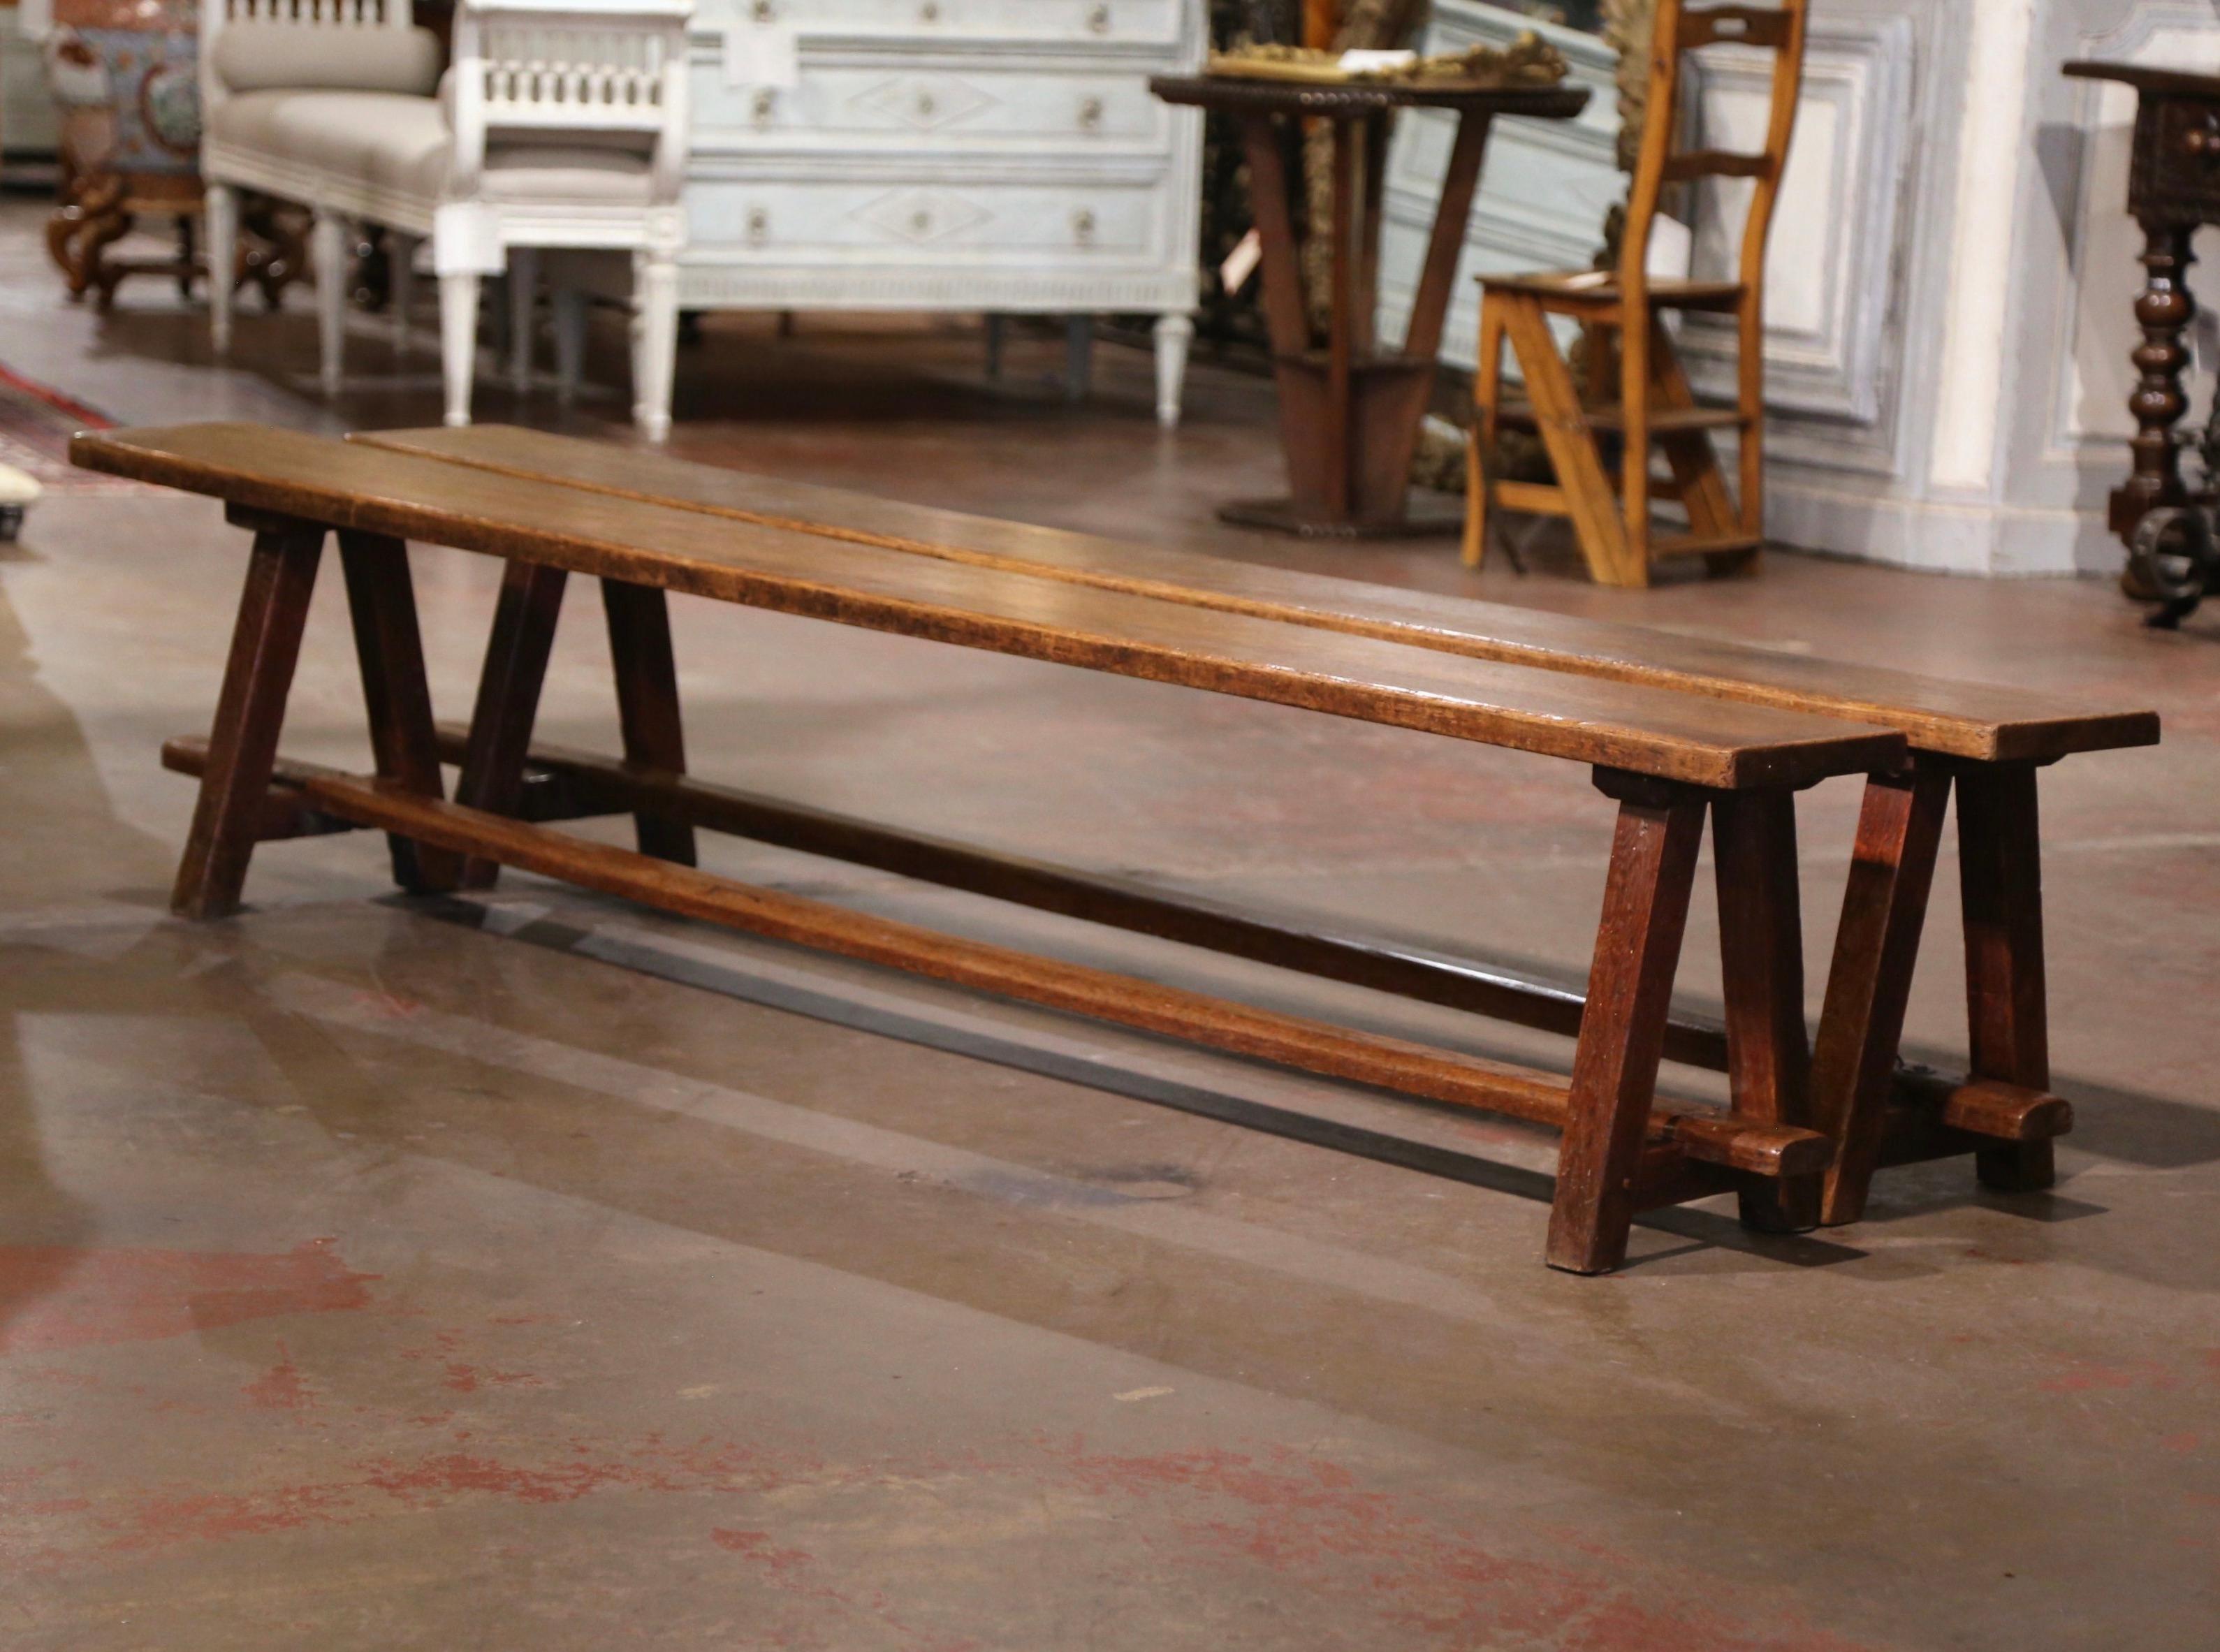 Dress a farm table with these elegant antique provincial benches. Crafted in Normandy, France circa 1880, and carved of oak wood, the sturdy farmhouse benches stands on joined A-fame legs and joined by a central stretcher. Each seat is built with